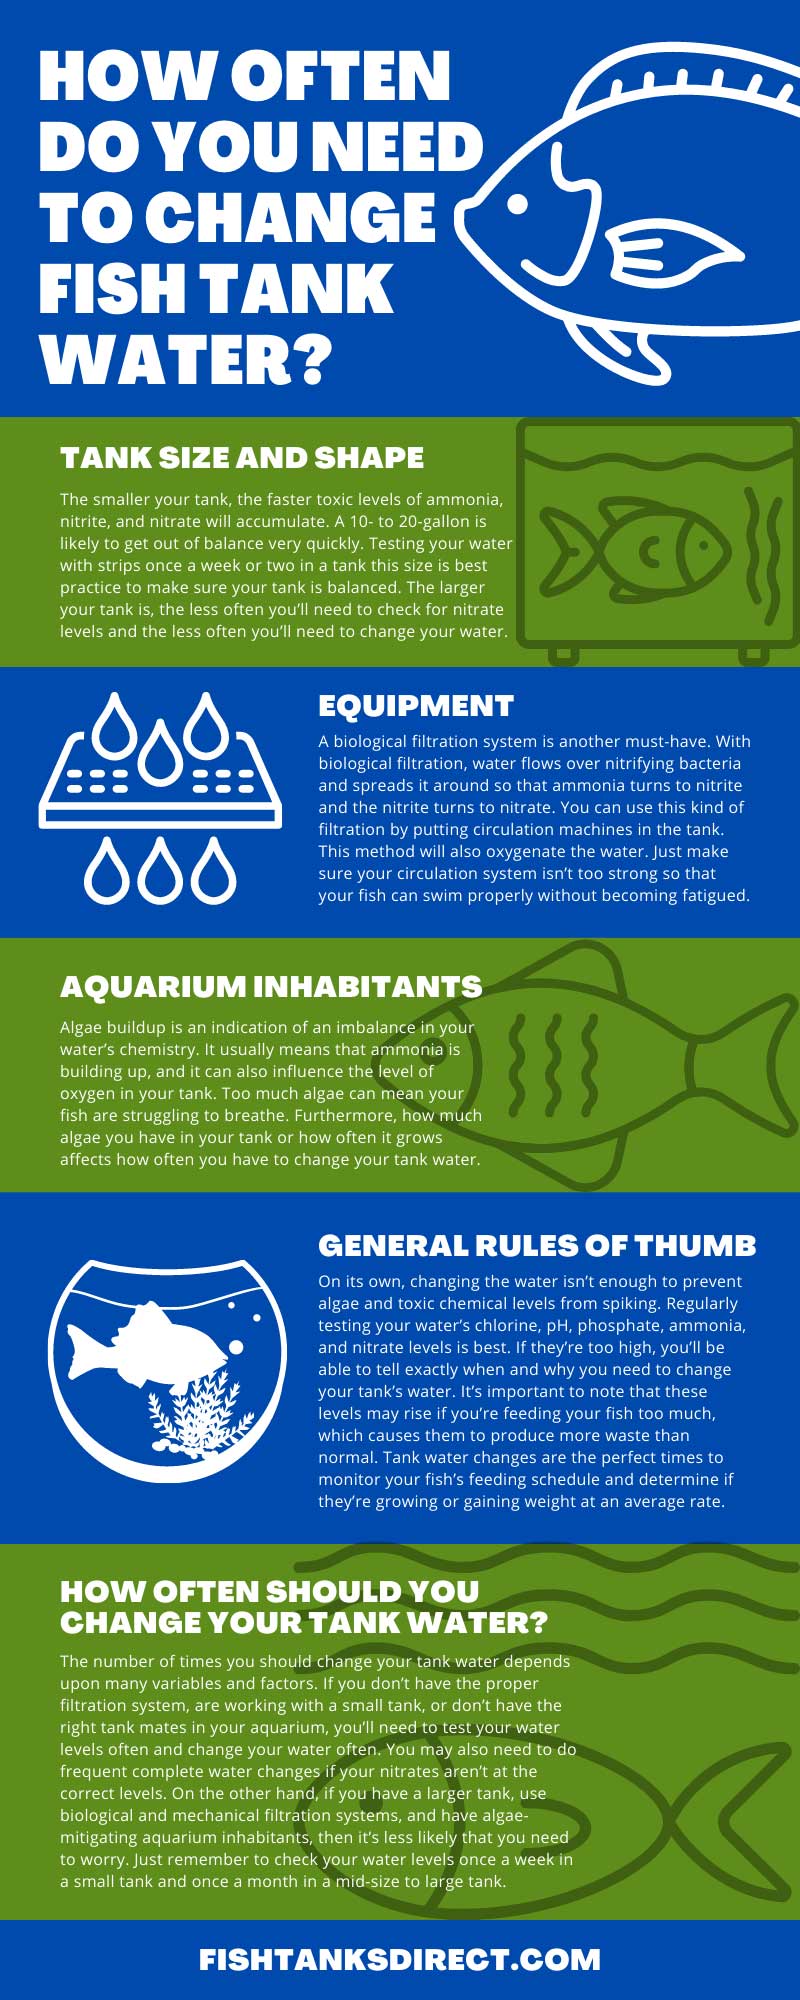 How Often Do You Need To Change Fish Tank Water?